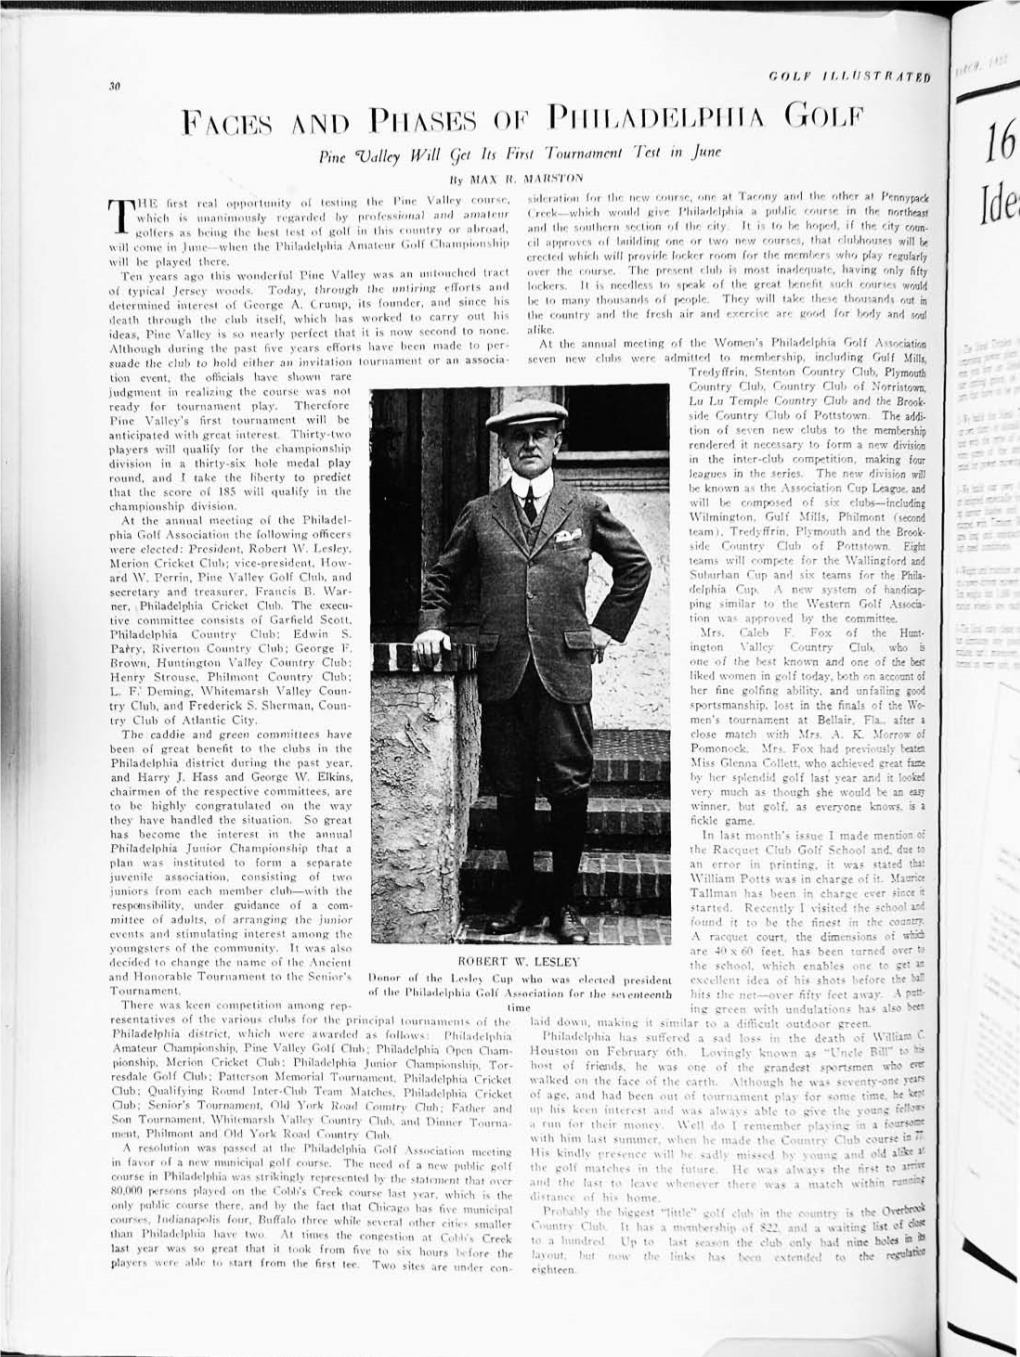 Golf Illustrated, March 1922